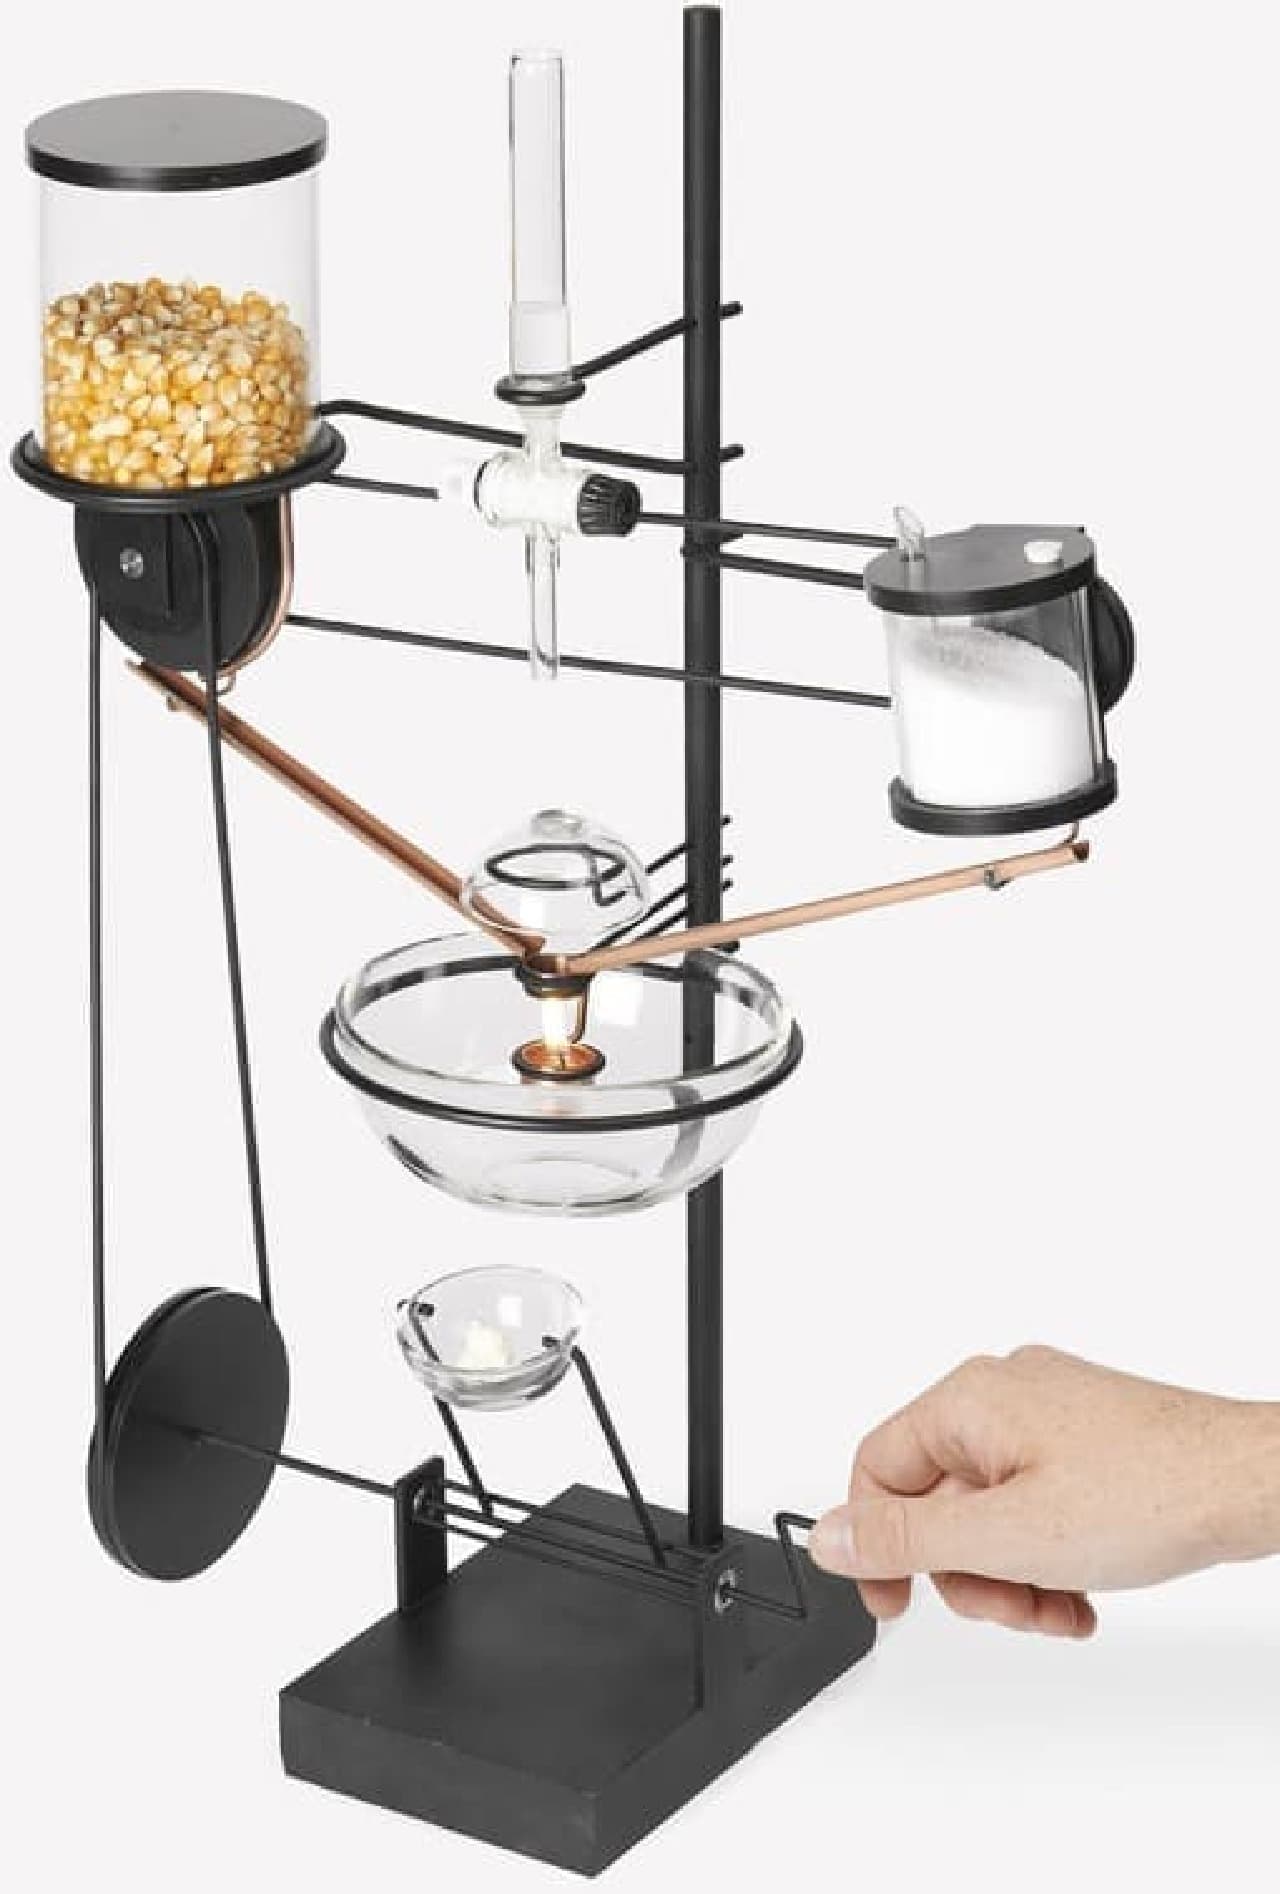 The world's most low-tech popcorn machine "Oncle Sam"